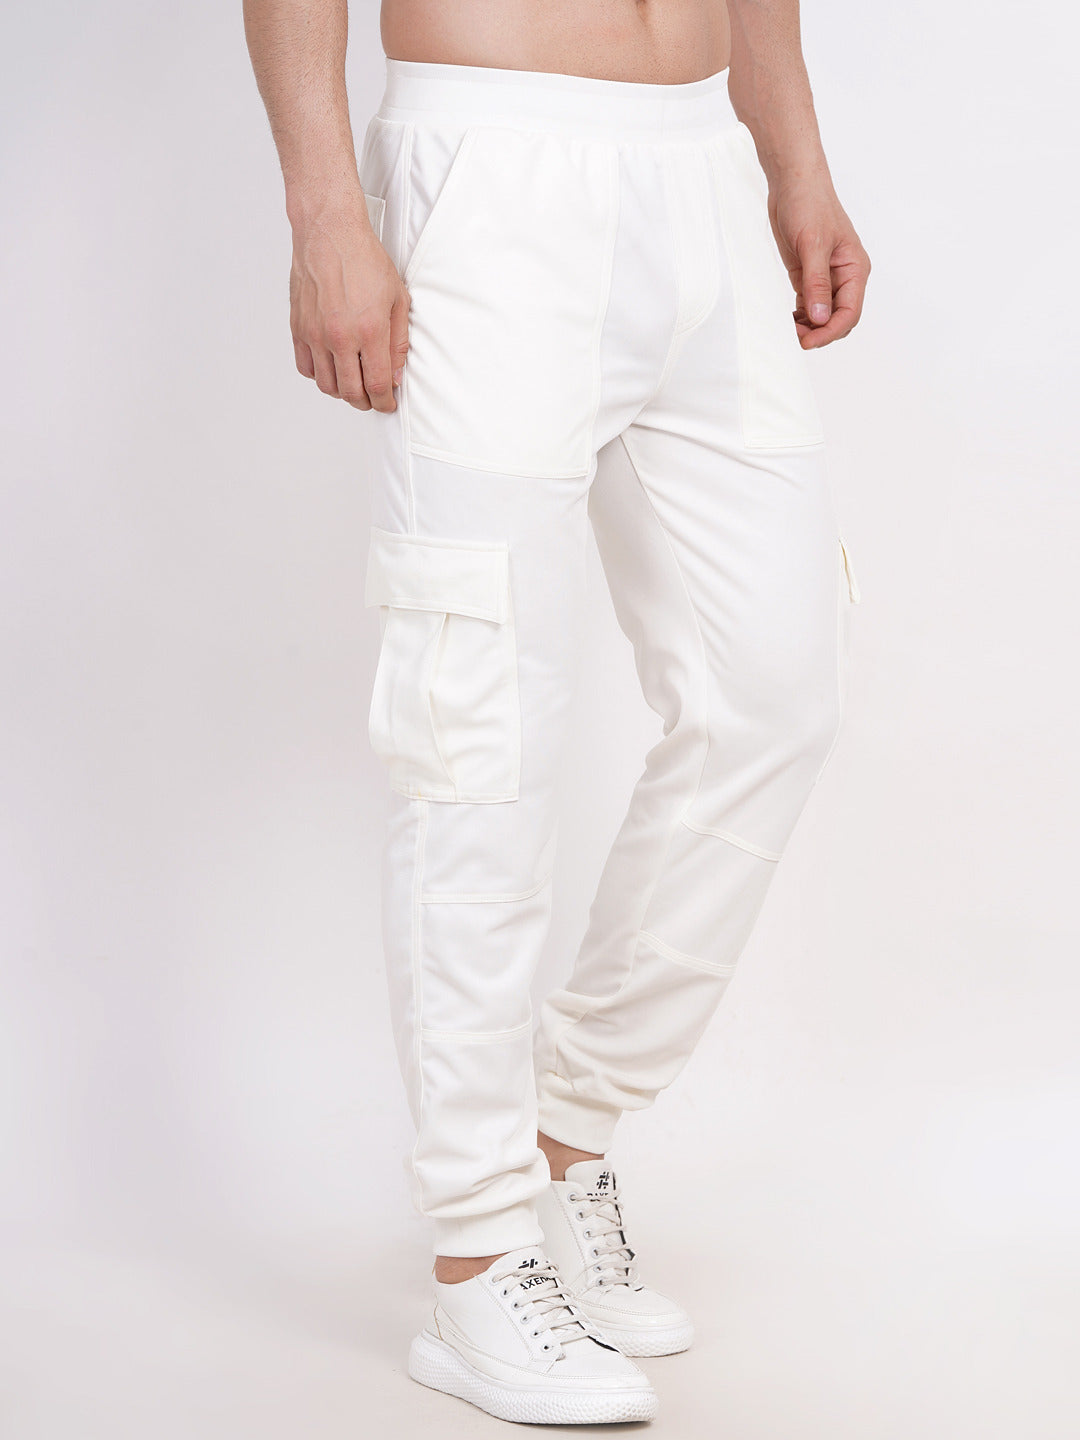 Manfinity Homme Men's White Striped Mesh Shirt & Pant | Party outfit men,  Mens outfits, Off white pants